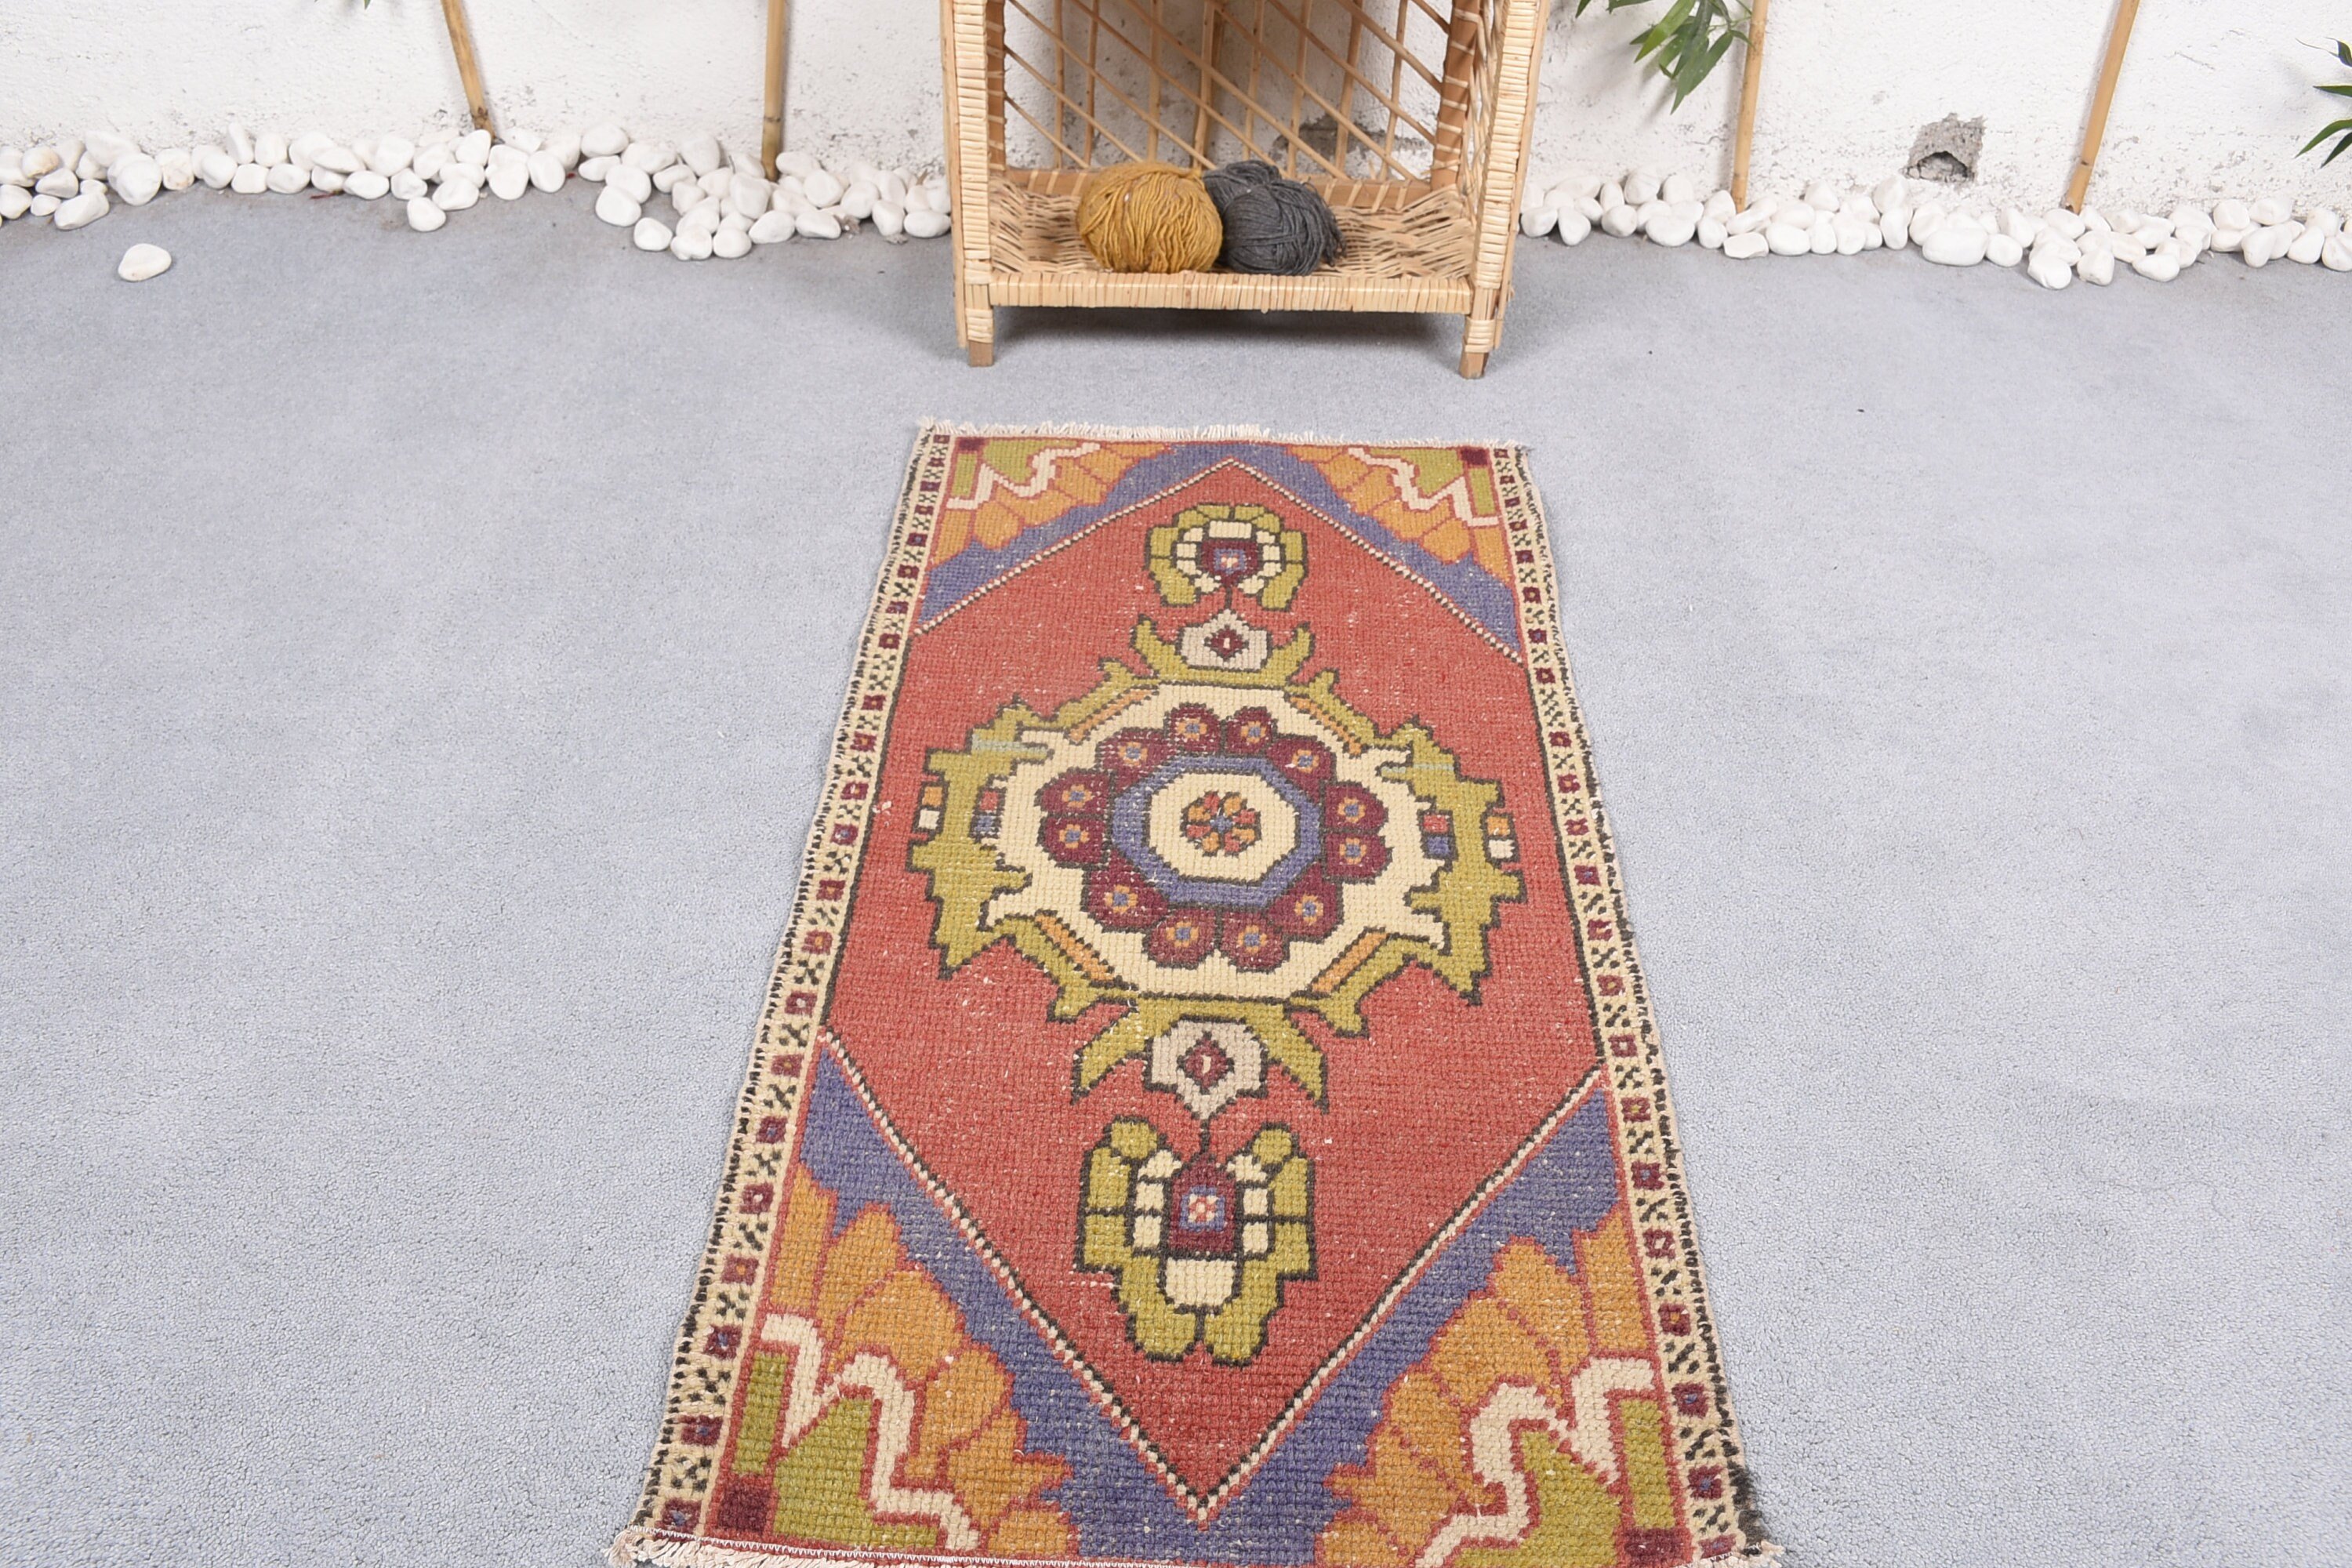 Retro Rugs, 1.7x3.4 ft Small Rug, Rugs for Bedroom, Turkish Rugs, Red Bedroom Rug, Vintage Rug, Bedroom Rug, Entry Rug, Home Decor Rug